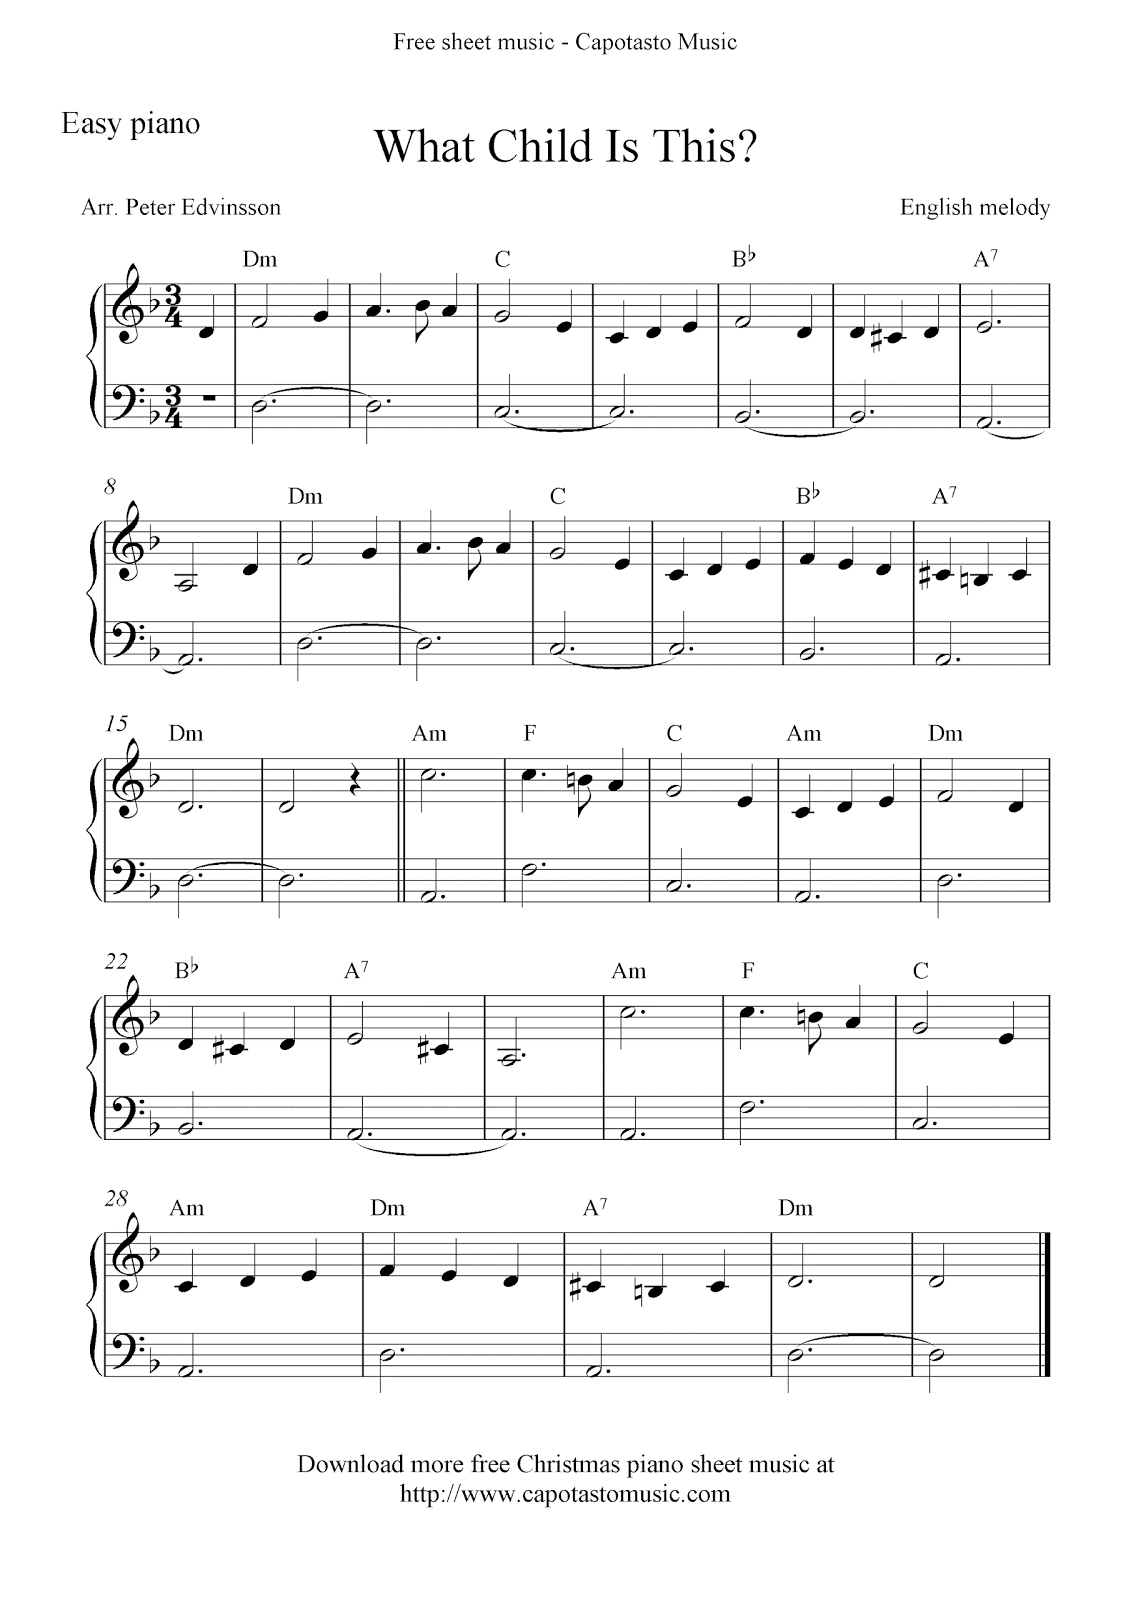 Free Christmas Piano Sheet Music, What Child Is This? - Free Printable Christmas Music Sheets Piano